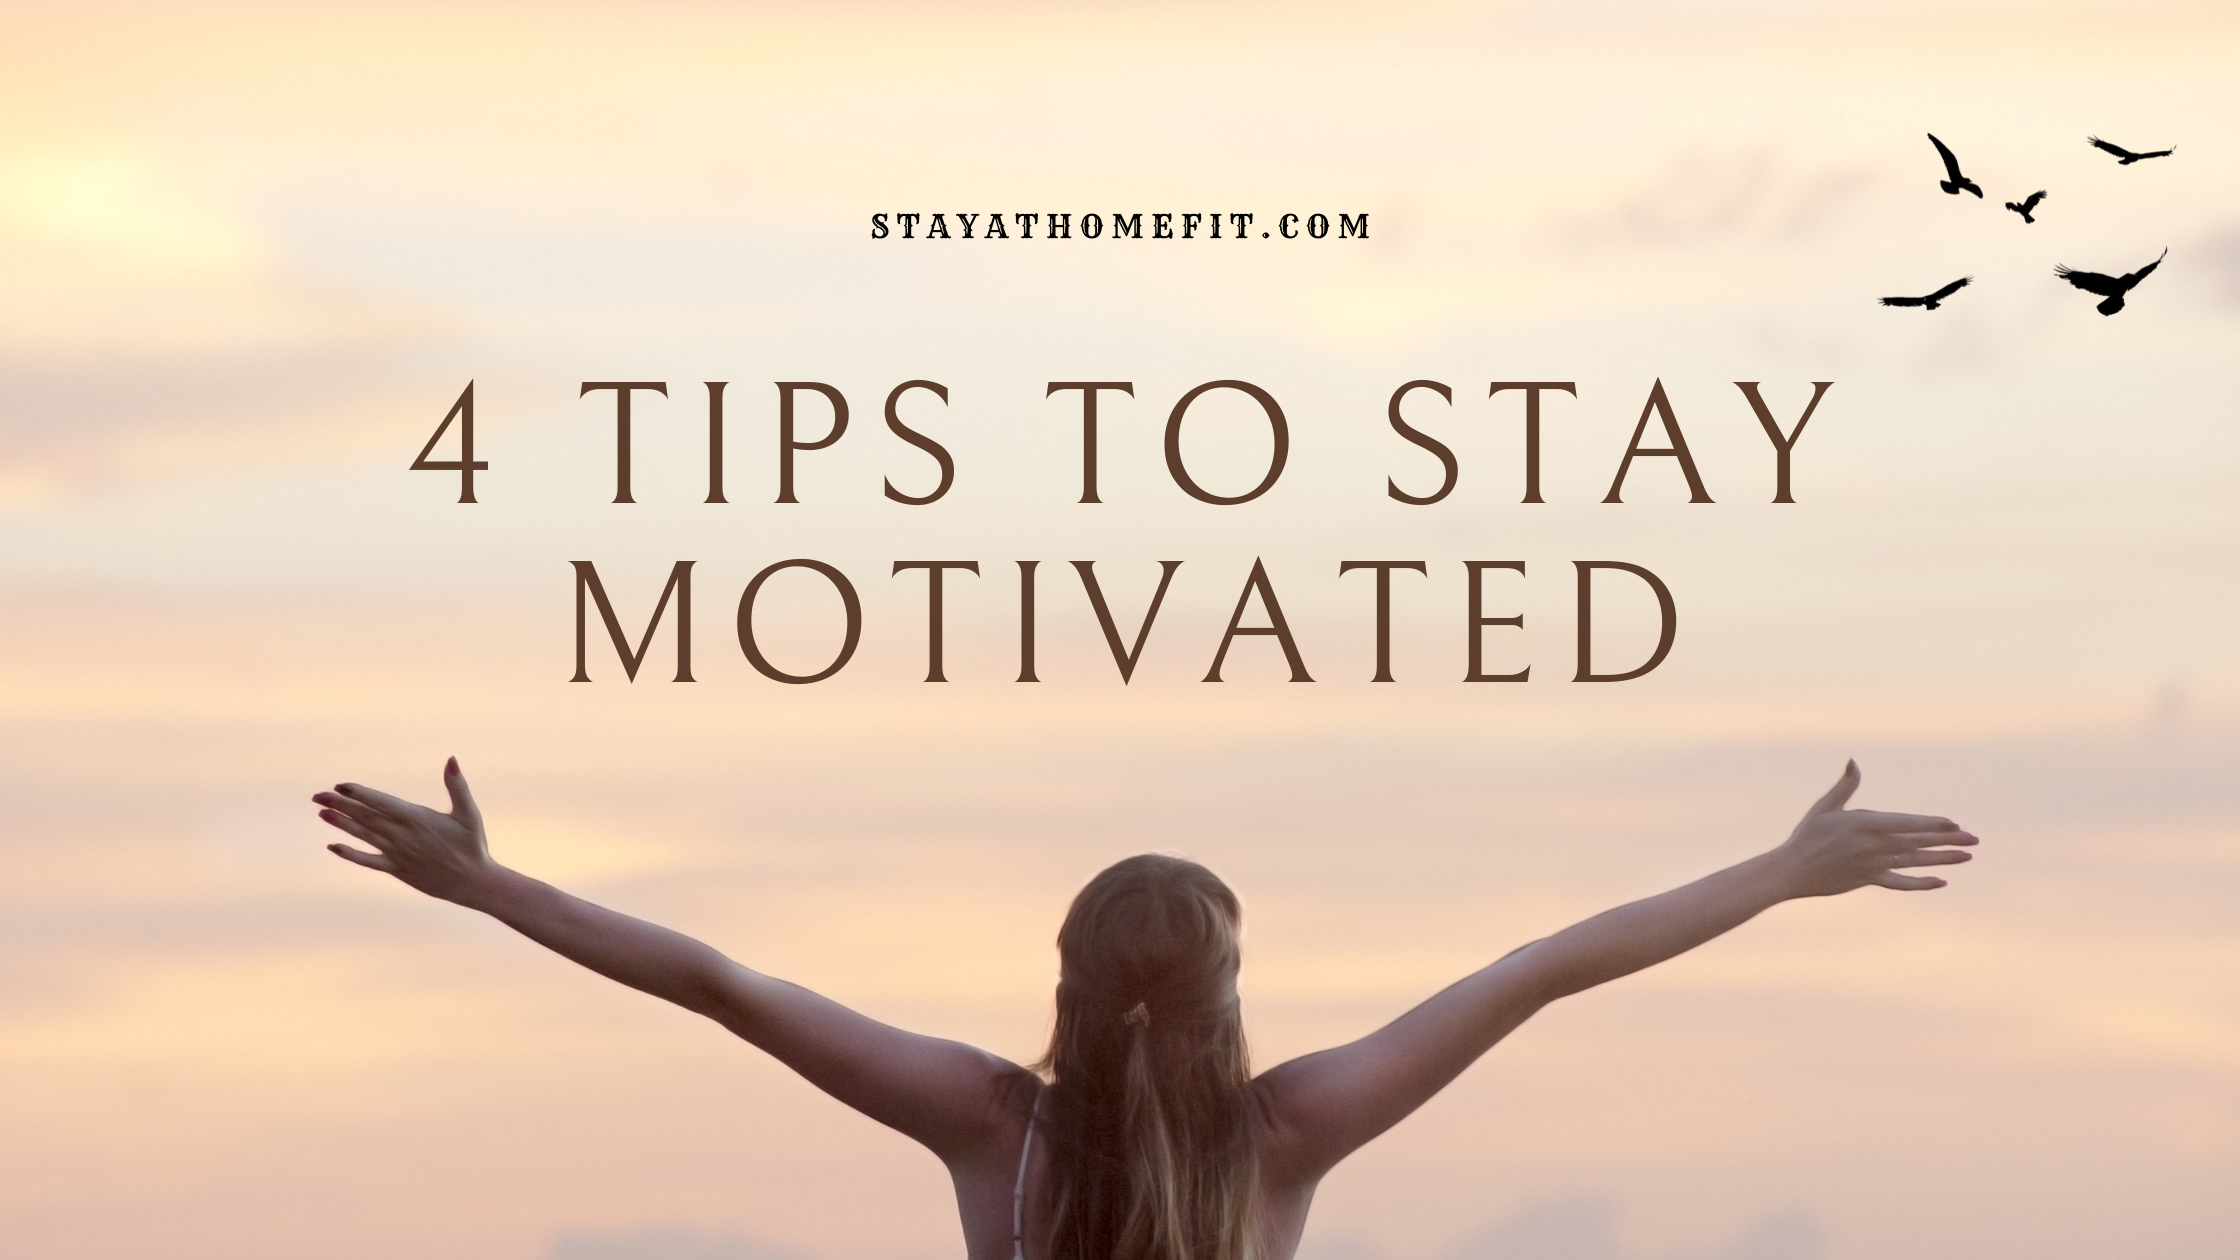 4 Tips to Stay Motivated